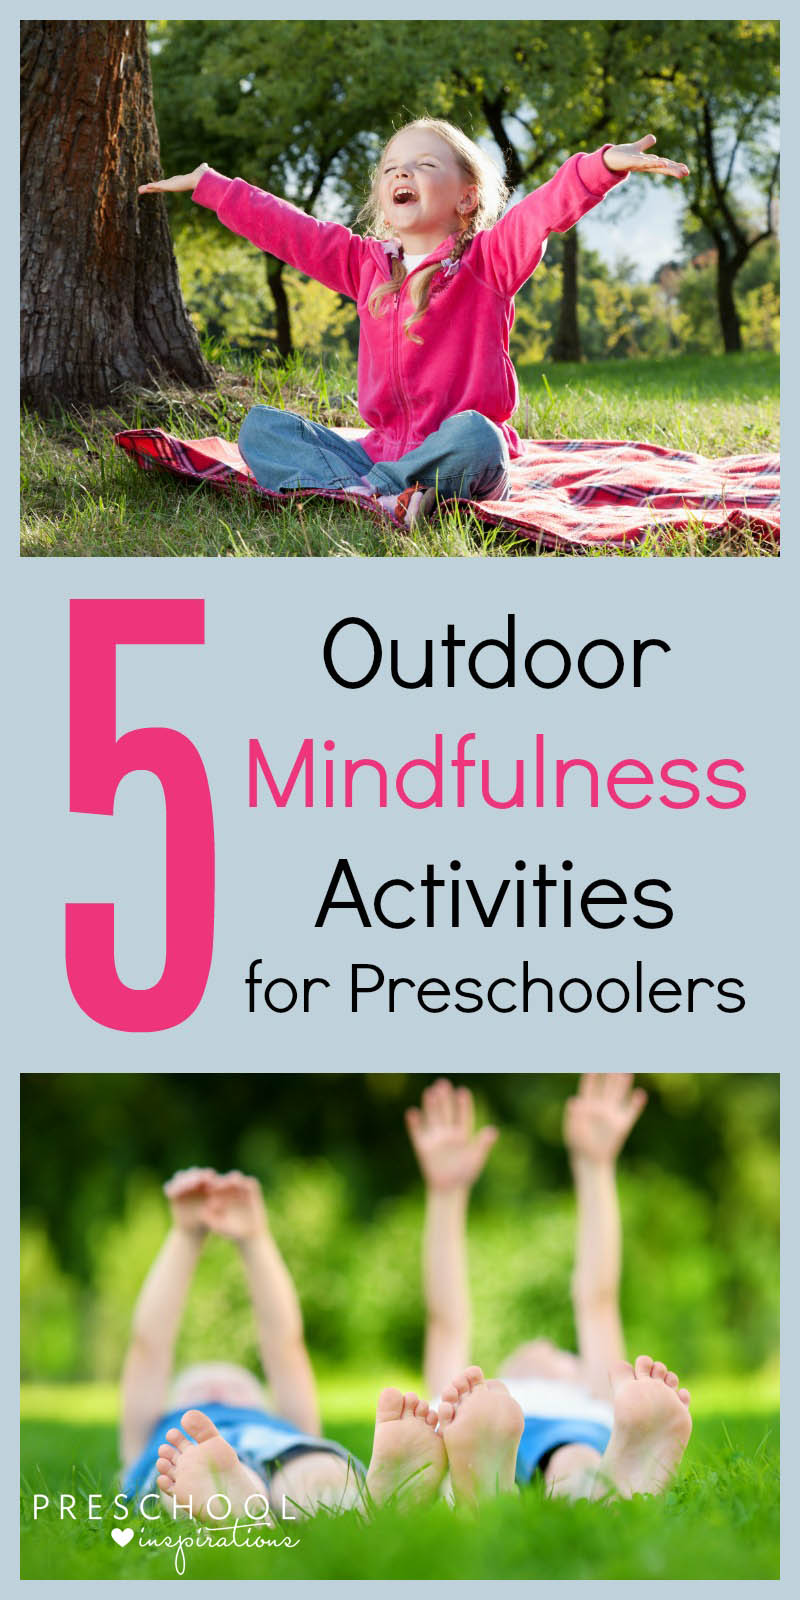 5 Outdoor Mindfulness Activities for Preschoolers. Try these fun and relaxing after-school activities for kids. From Preschool Inspirations.